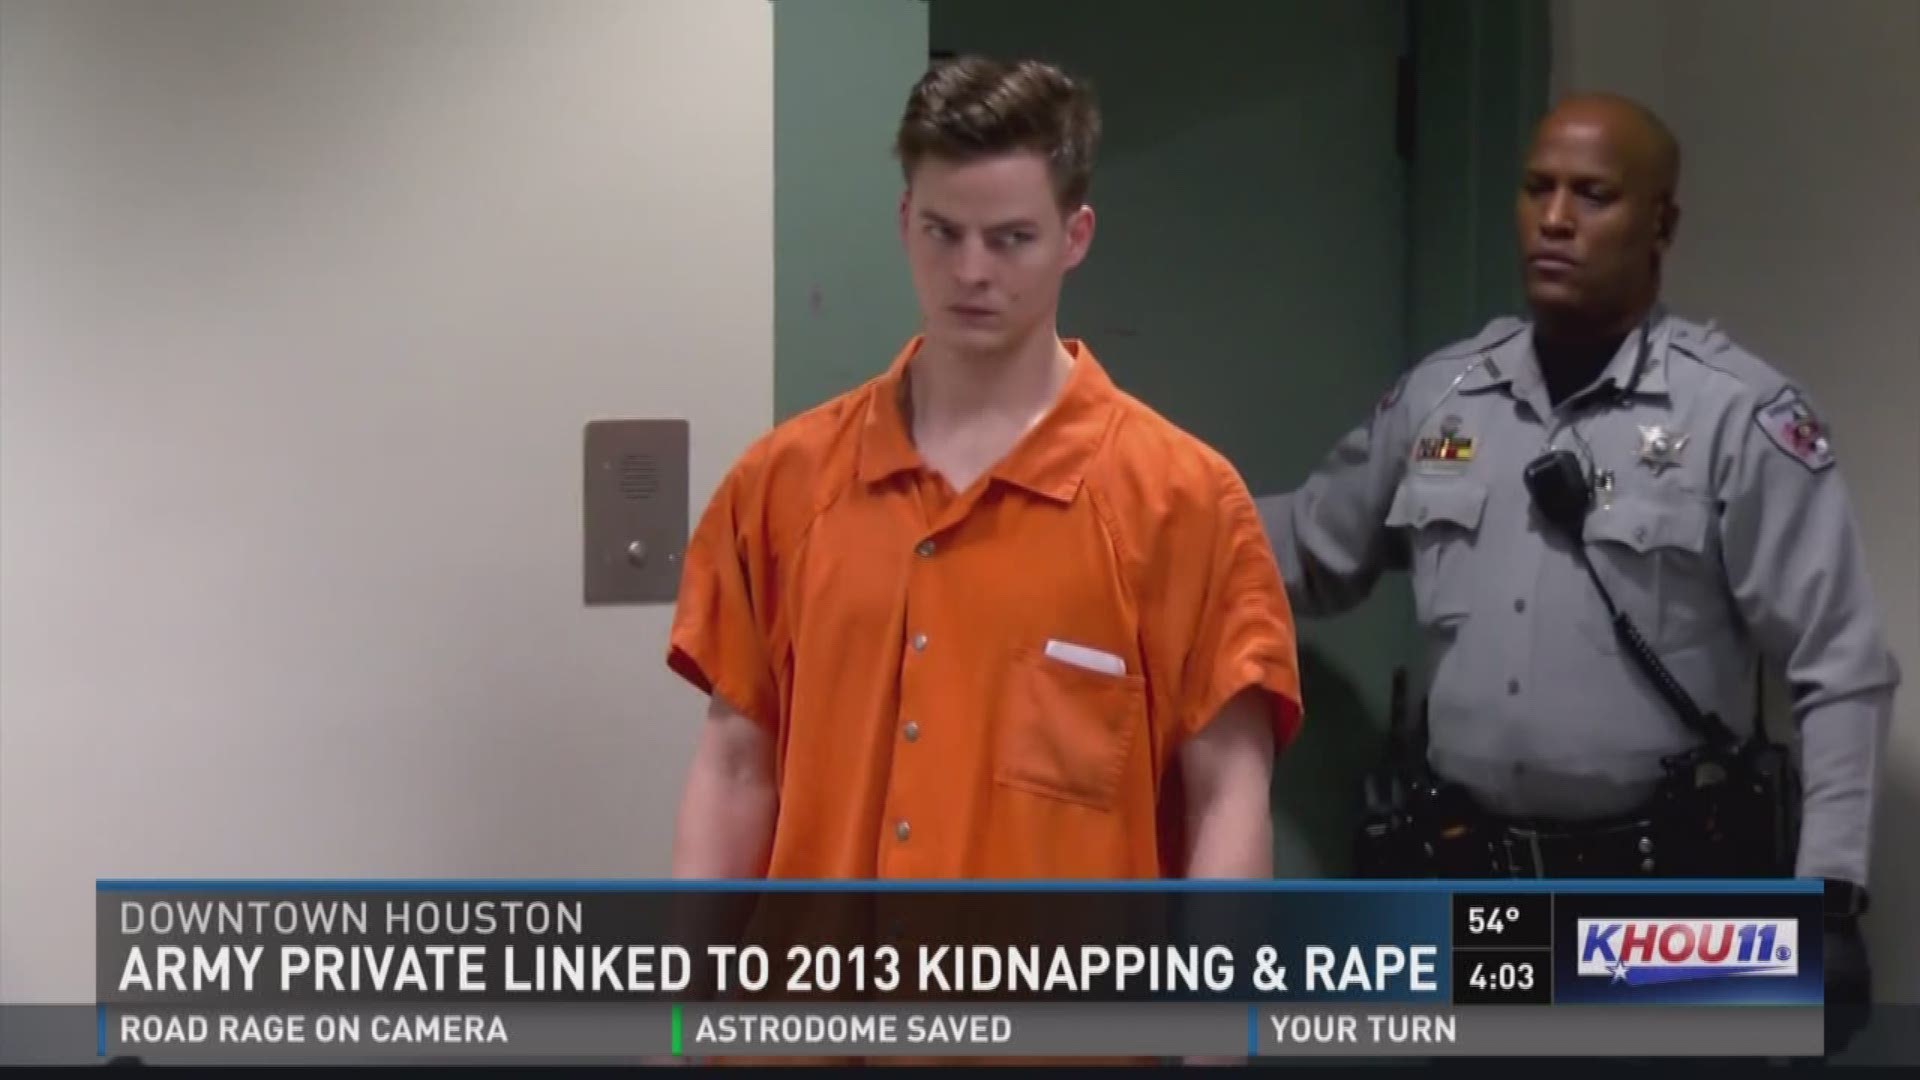 A soldier from Fort Bragg has been charged in a brutal 2013 kidnapping and rape in Harris County.Levi Goss, 24, was arrested in North Carolina last month after a DNA test linked him to the cold case out of Harris County. Now, military authorities in Nort